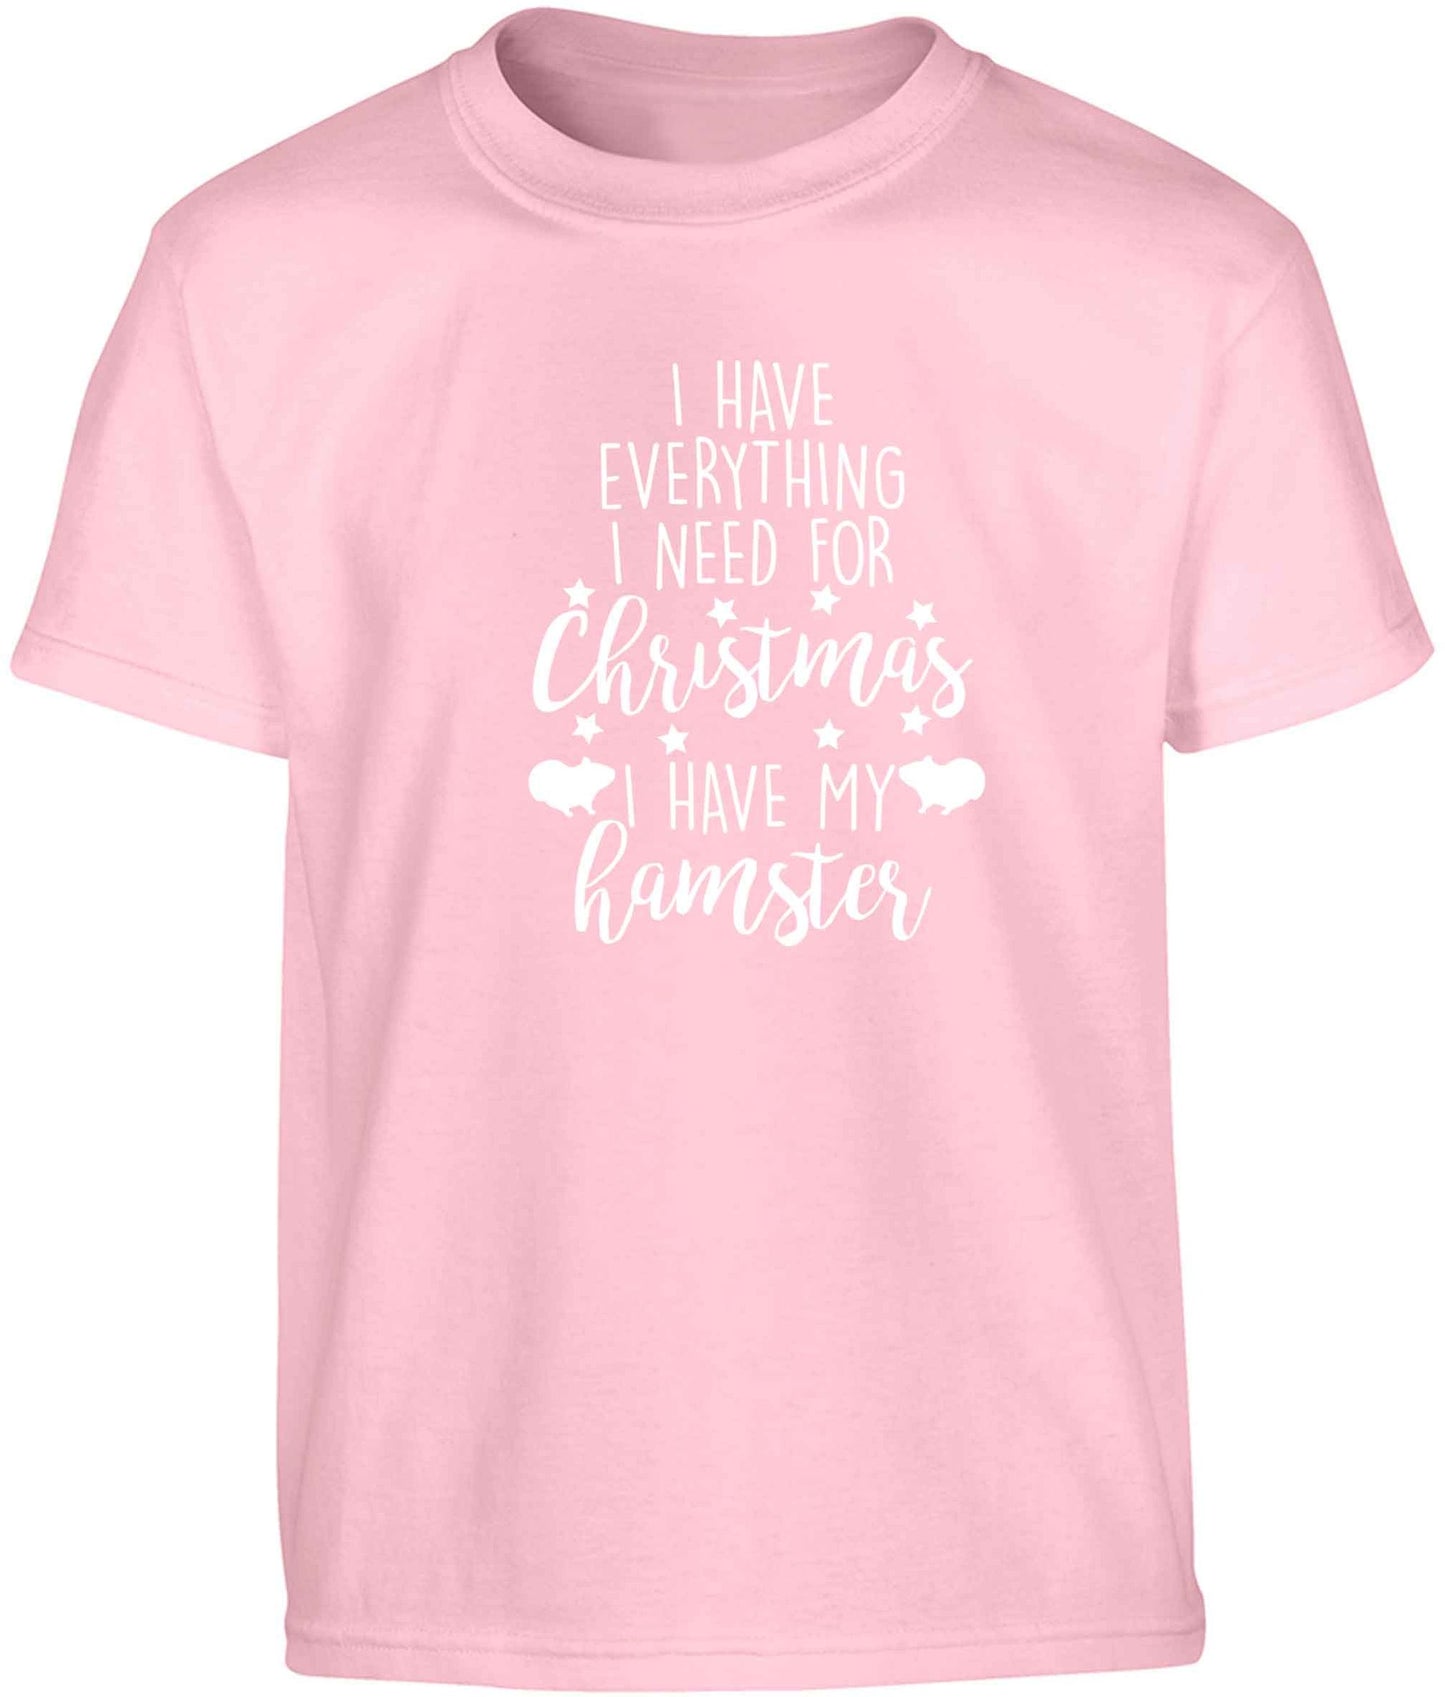 I have everything I need for Christmas I have my hamster Children's light pink Tshirt 12-13 Years